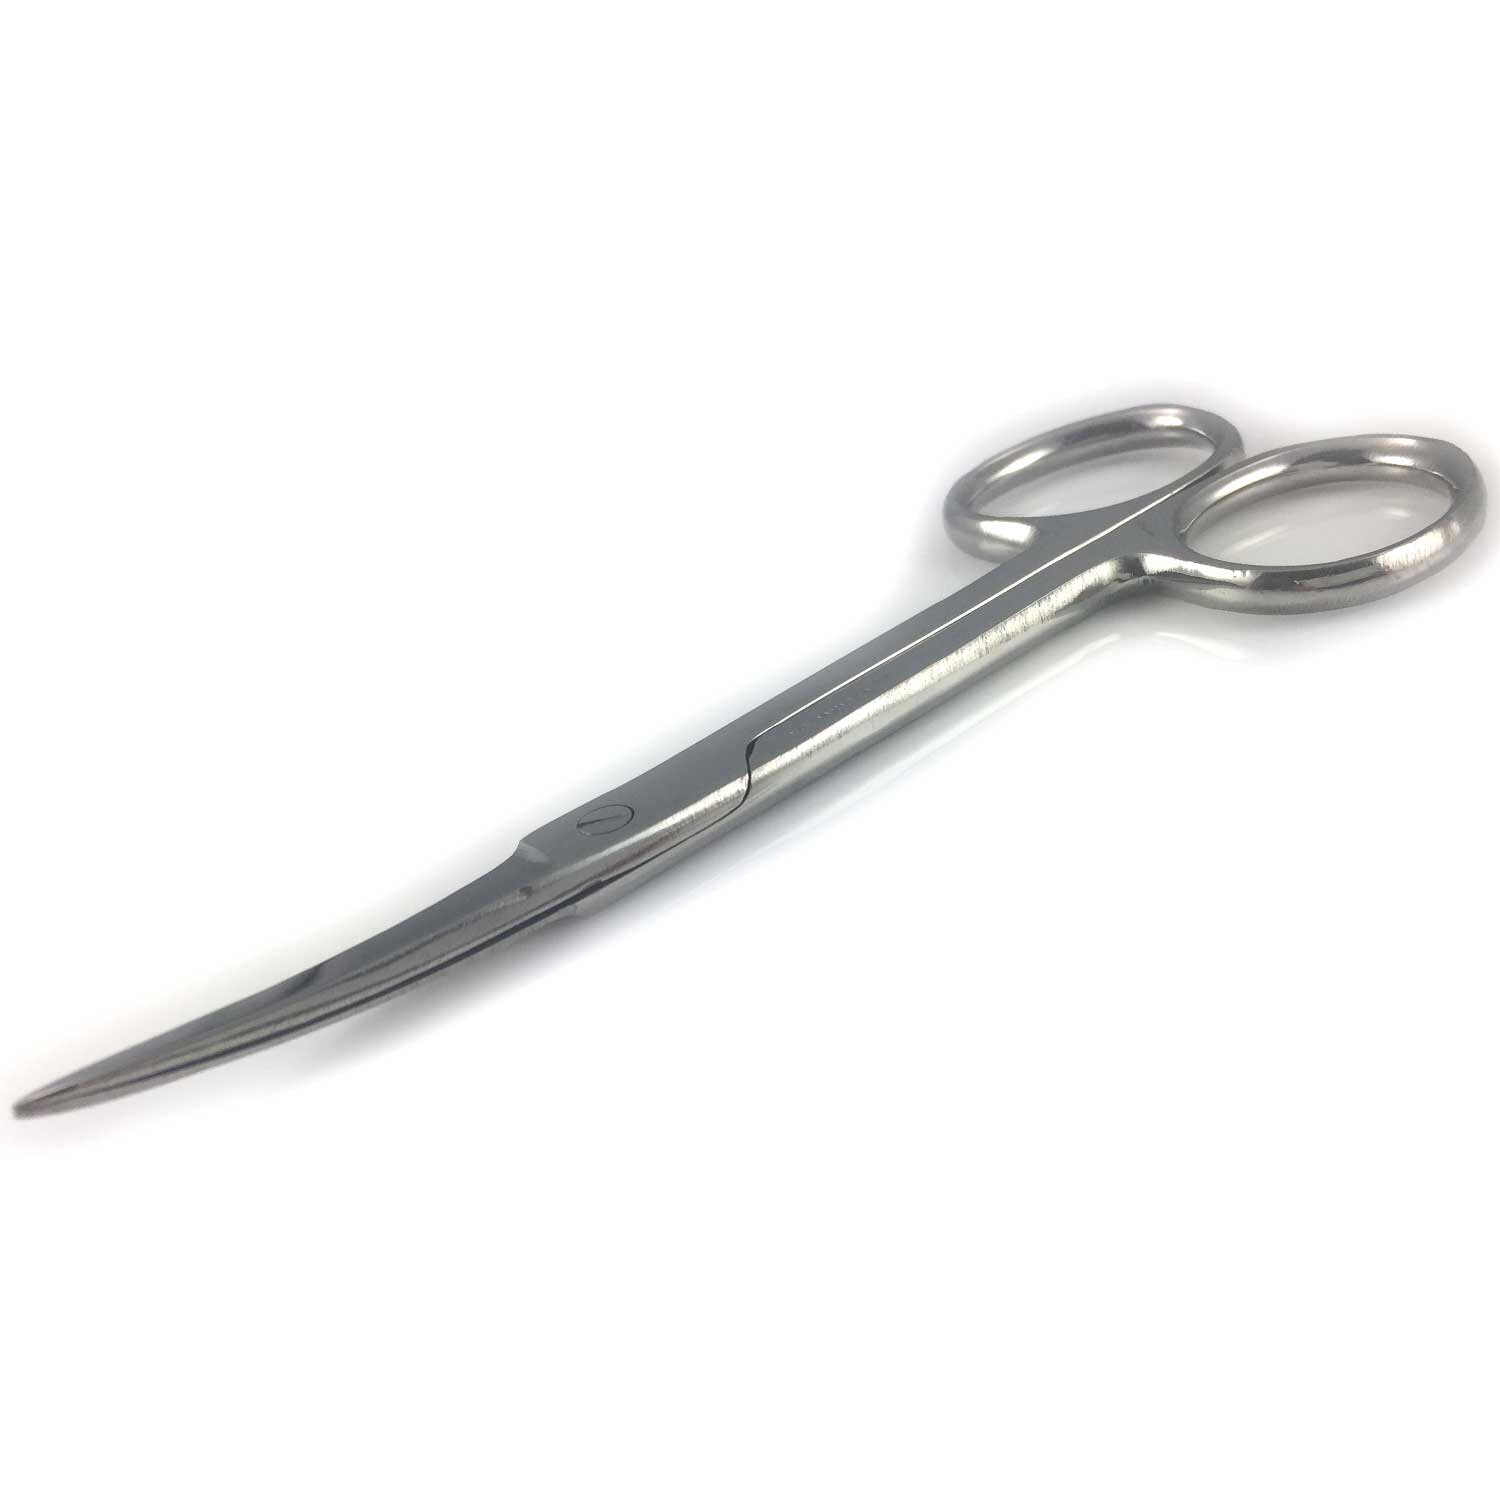 Image of Scissors - 3.5" Curved Fine Point Surgical Quality Stainless Steel